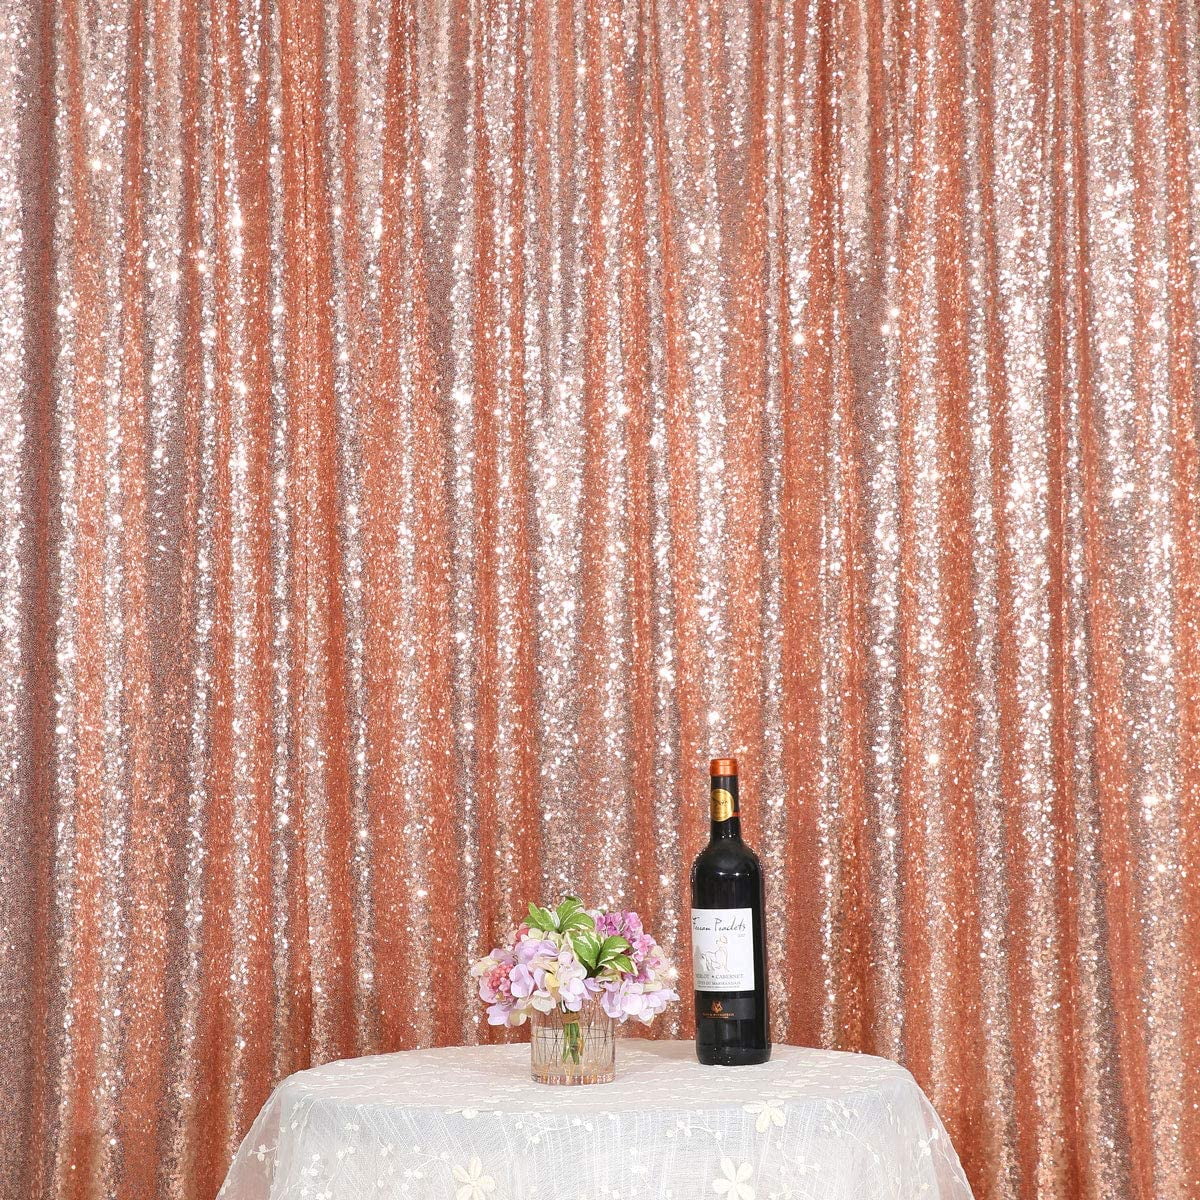 Details about   6ftx6ft Rose Gold Sequin Wedding Party Backdrop Sparkly Photography Background 